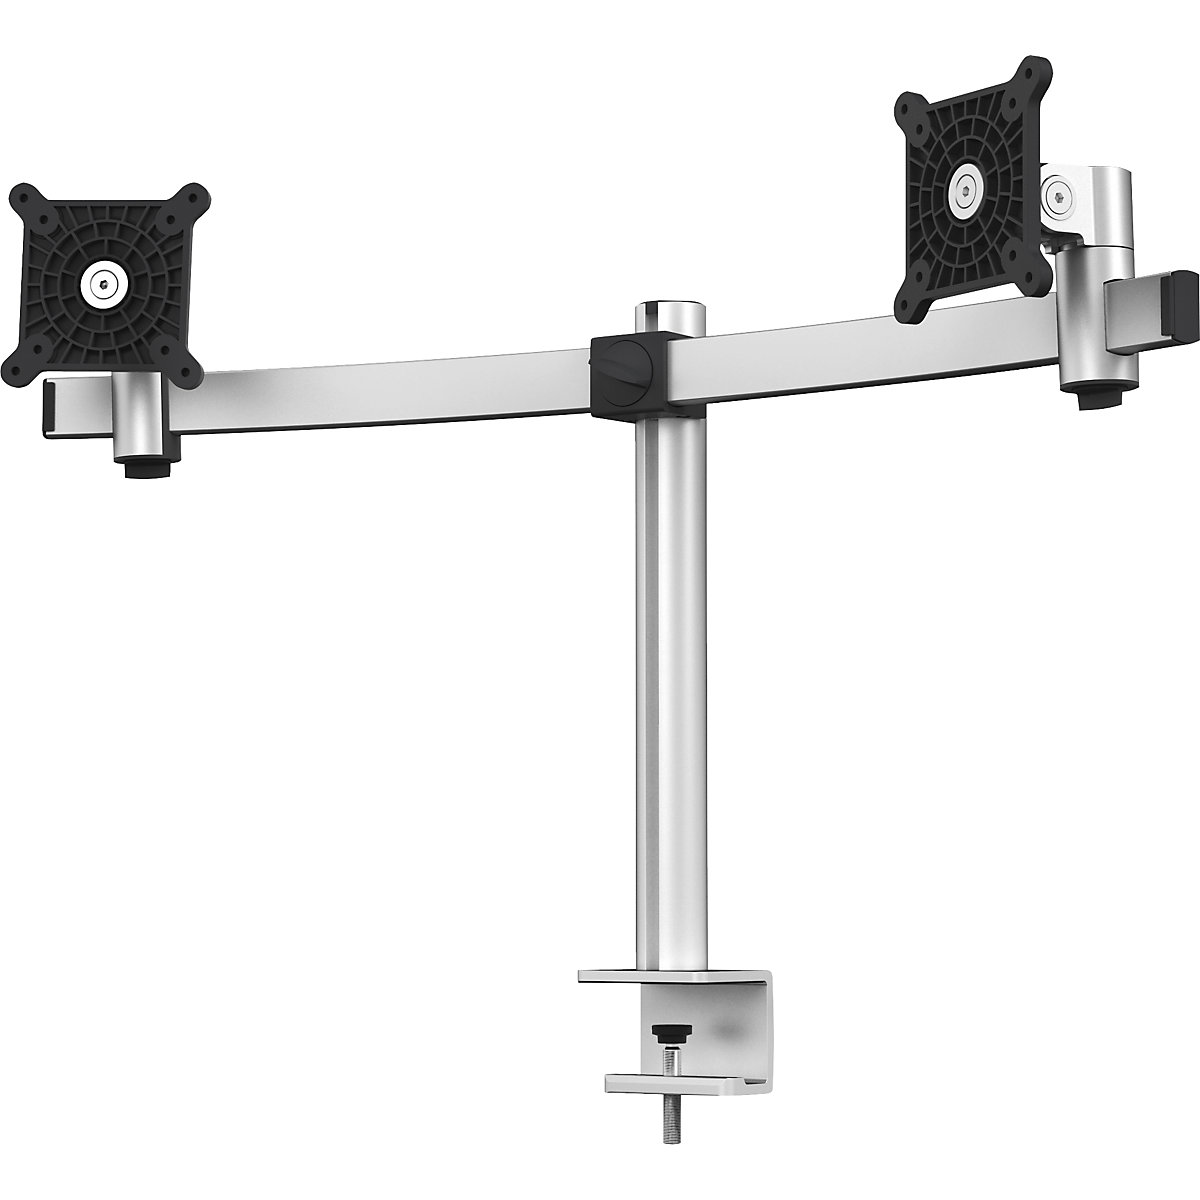 Monitor holder for 2 monitors - DURABLE